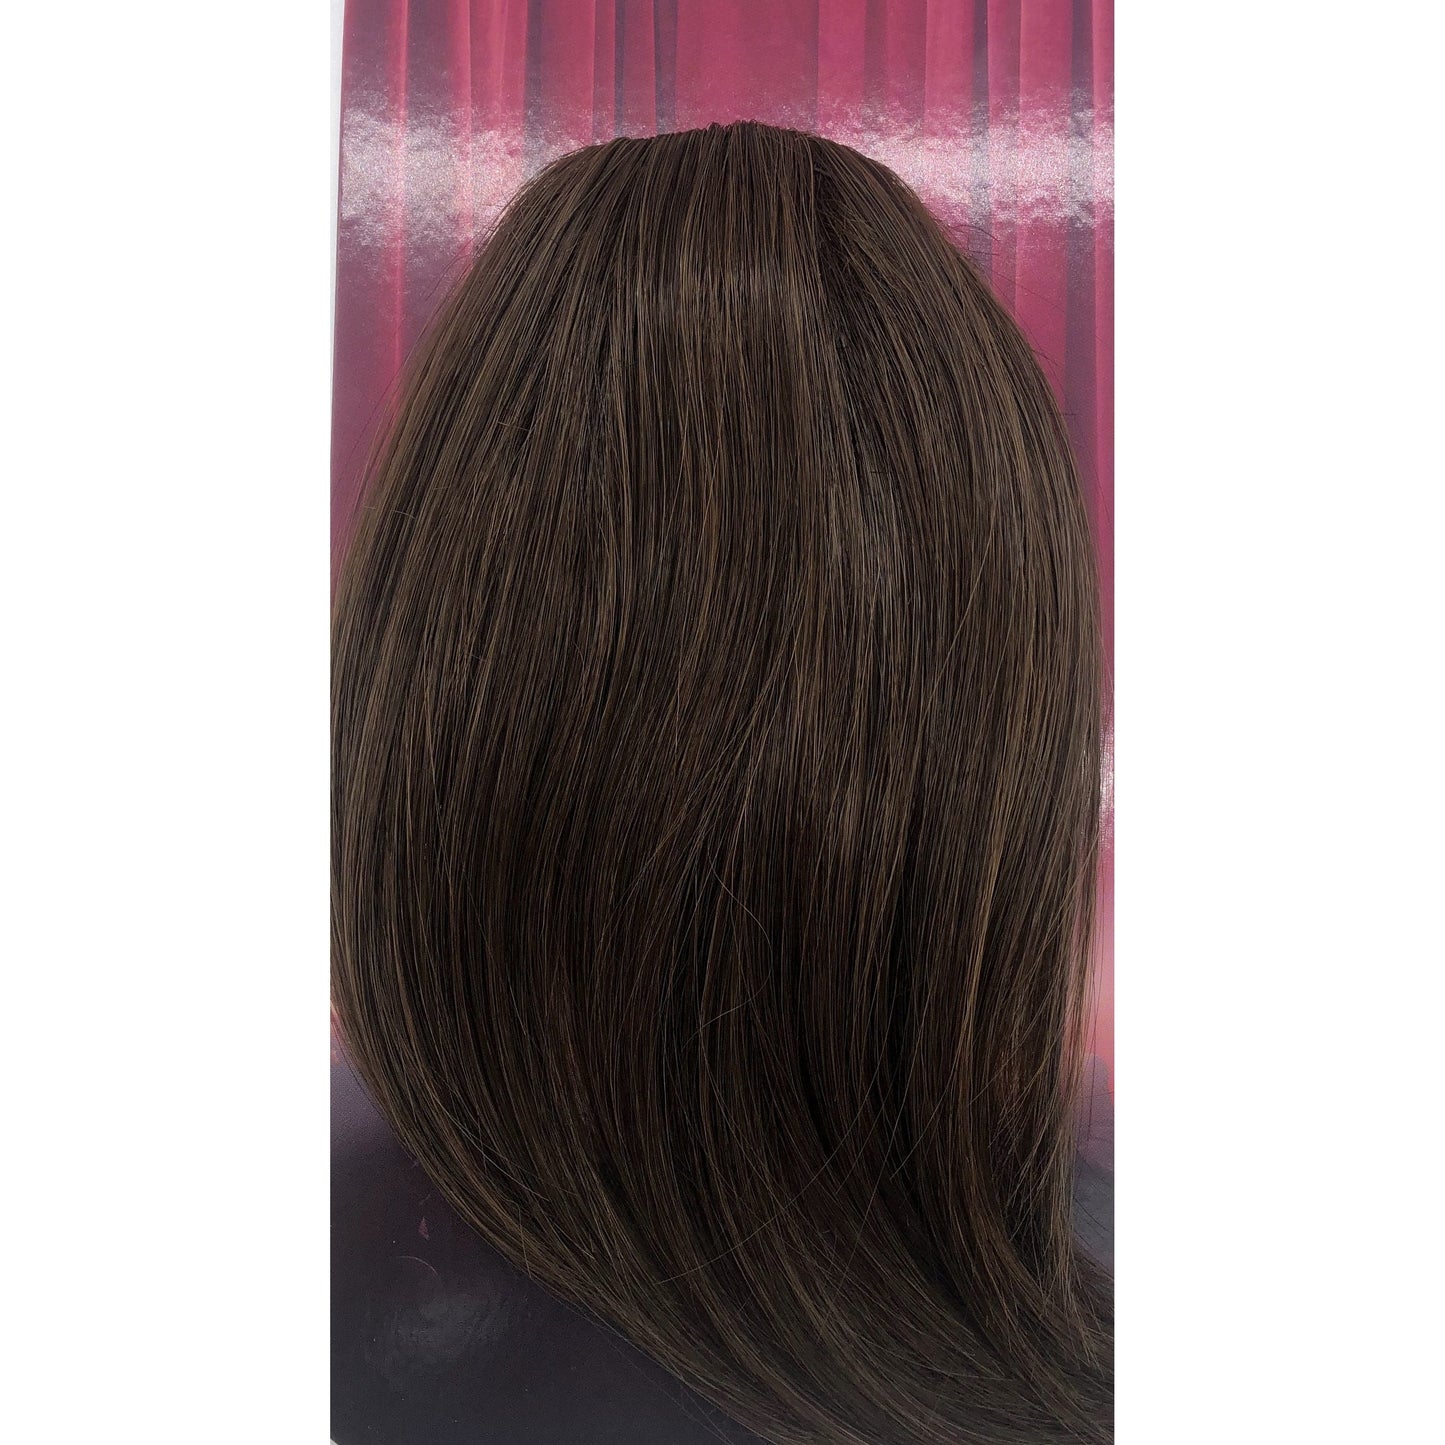 E! SWEPT AWAY SIDE BANG - by Hairdo - VIP Extensions